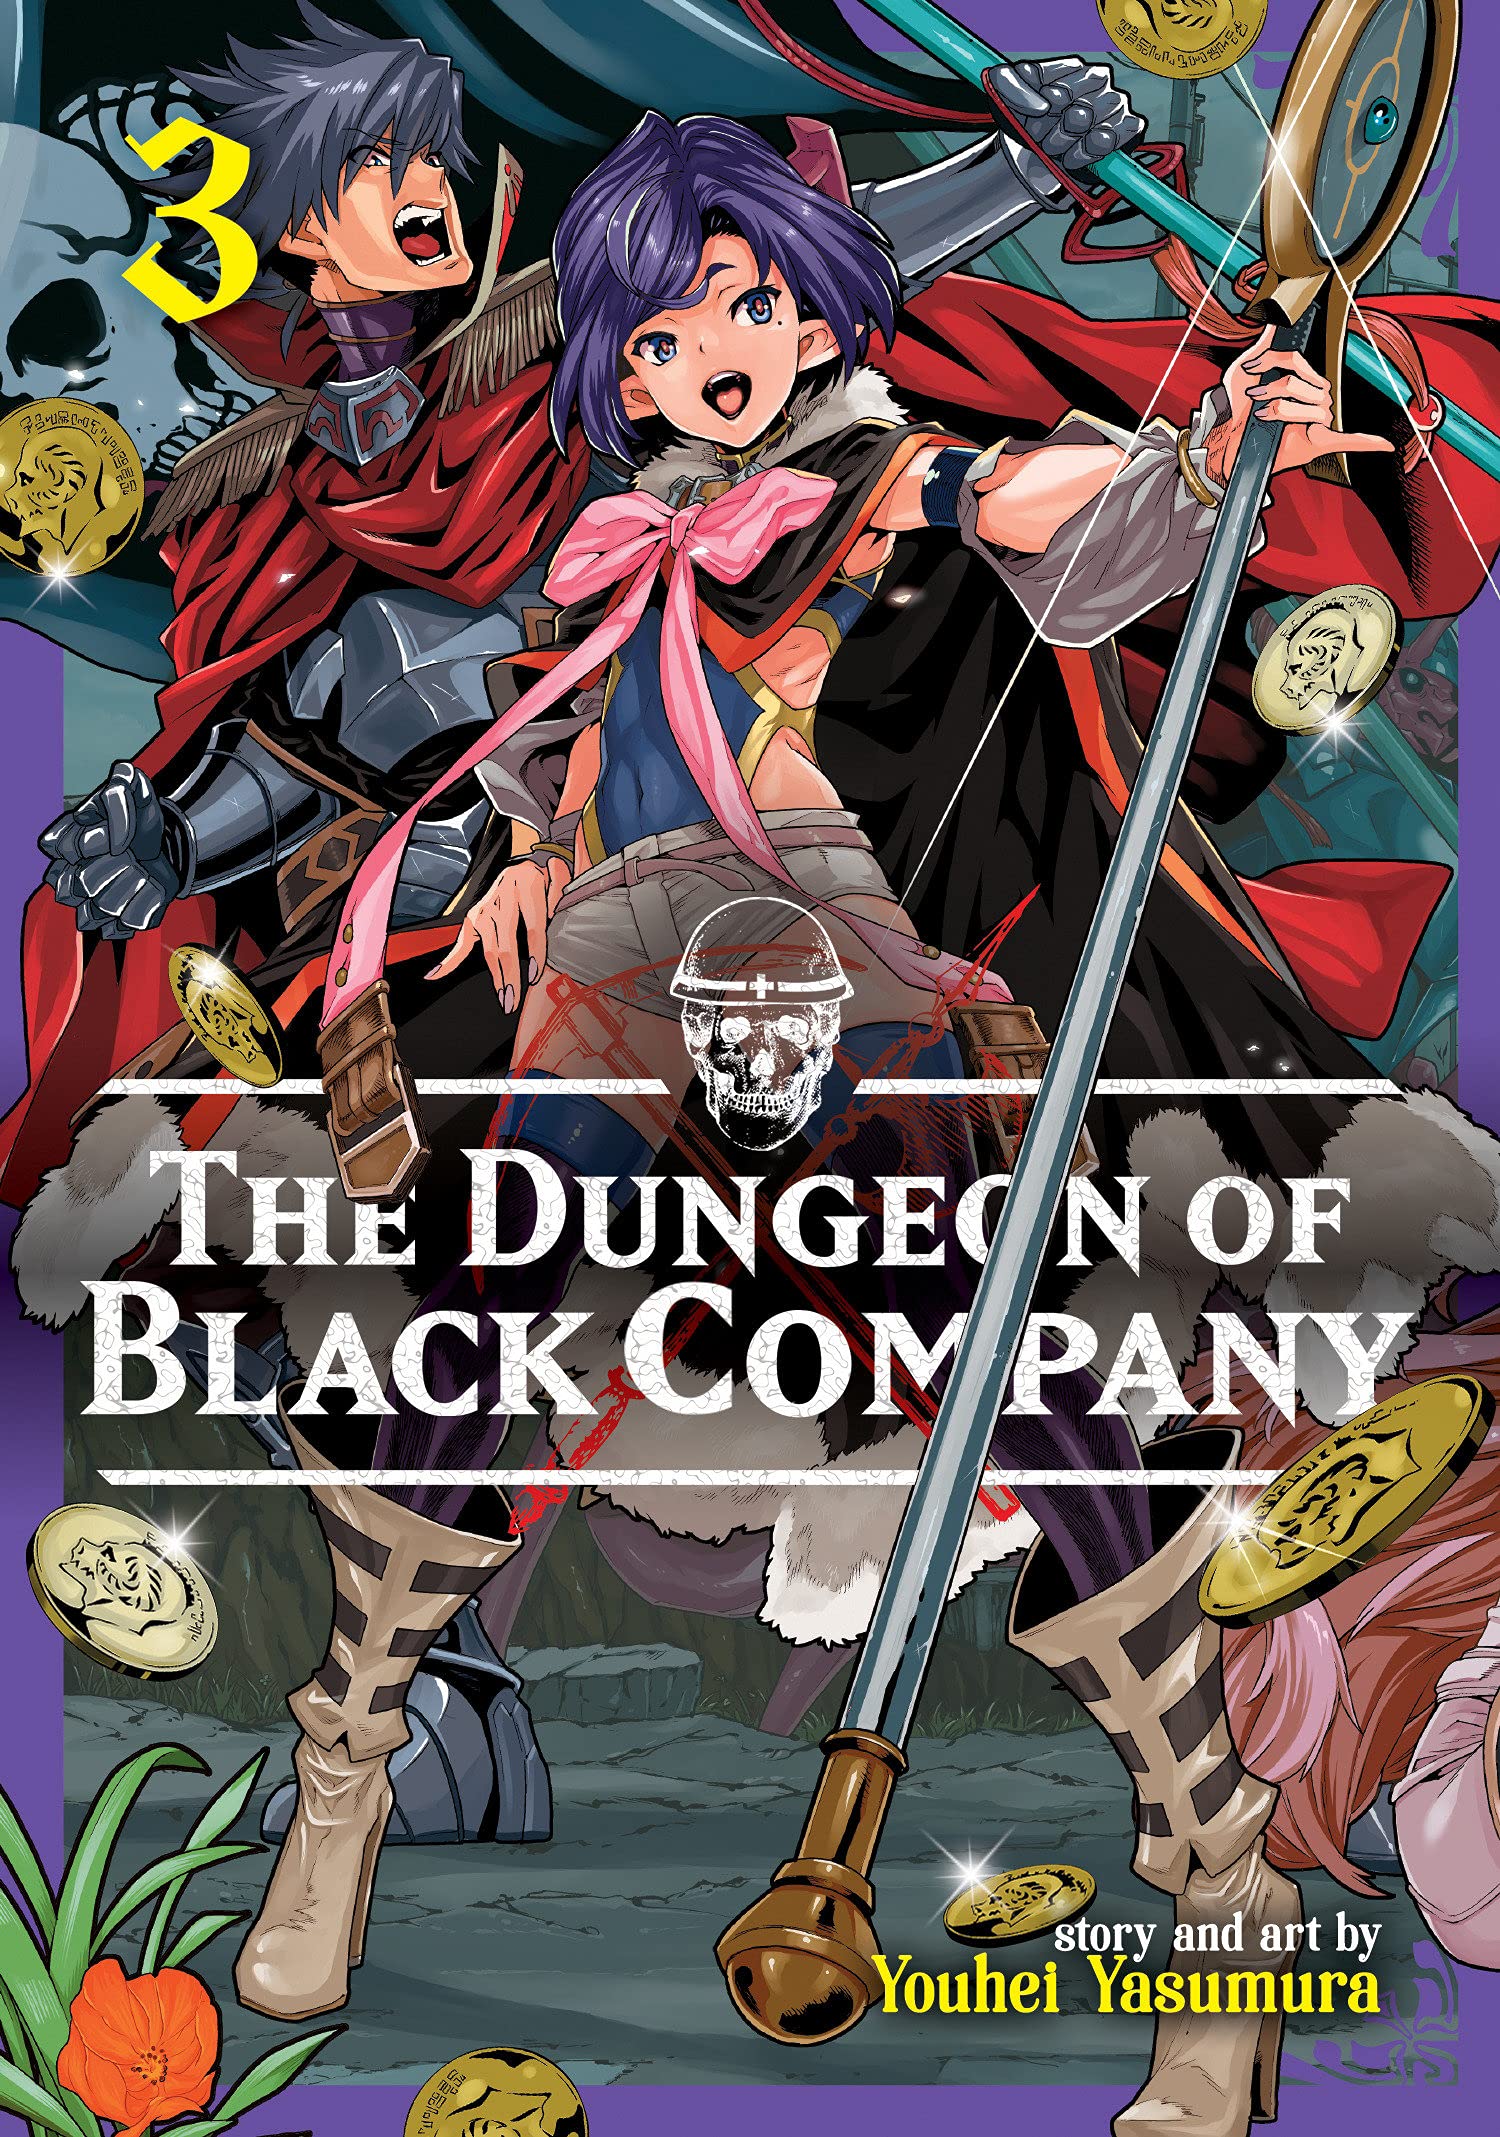  The Dungeon of Black Company (Meikyuu Black Company) Anime  Fabric Wall Scroll Poster (16 x 23) Inches [A] The DungeonBlack Comp-5:  Posters & Prints